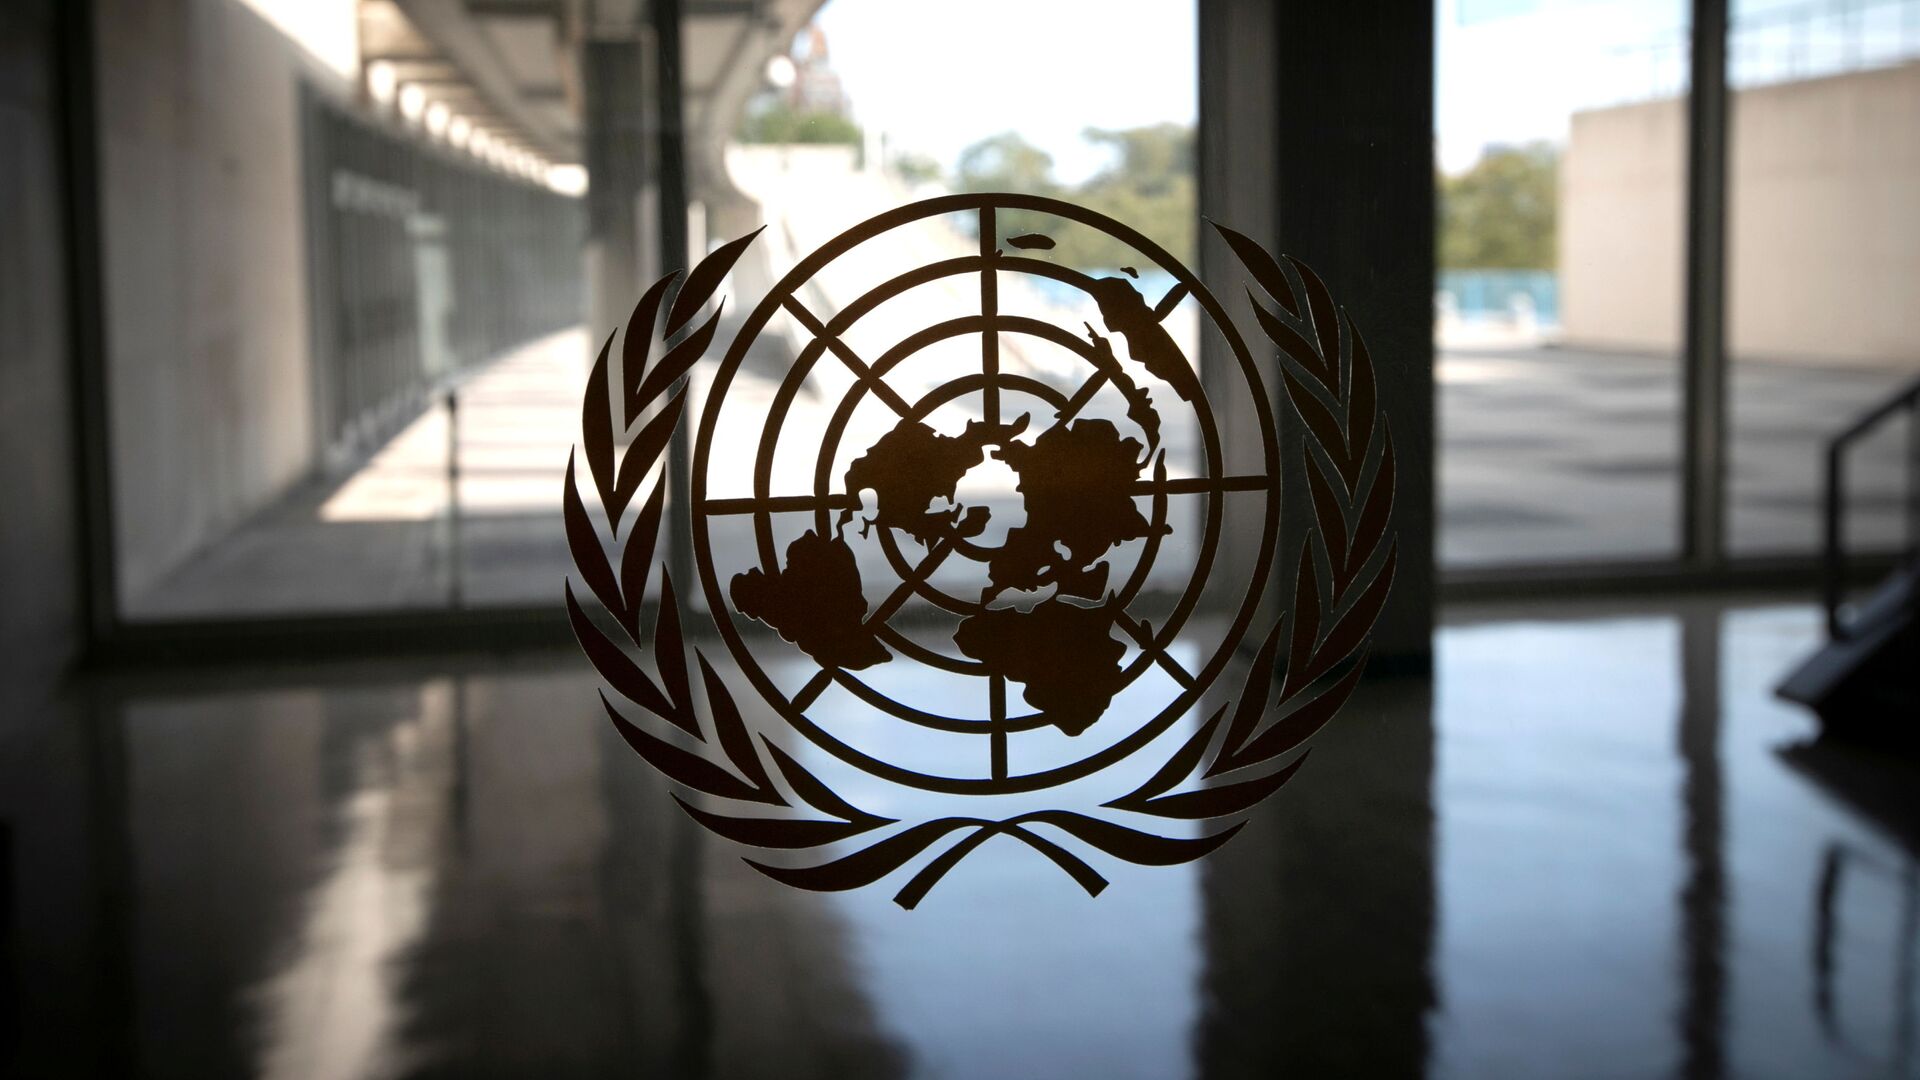 The United Nations logo is seen on a window in an empty hallway at United Nations headquarters during the 75th annual UN General Assembly high-level debate, which is being held mostly virtually due to the coronavirus disease (COVID-19) pandemic in New York, US, September 21, 2020 - Sputnik International, 1920, 08.04.2022